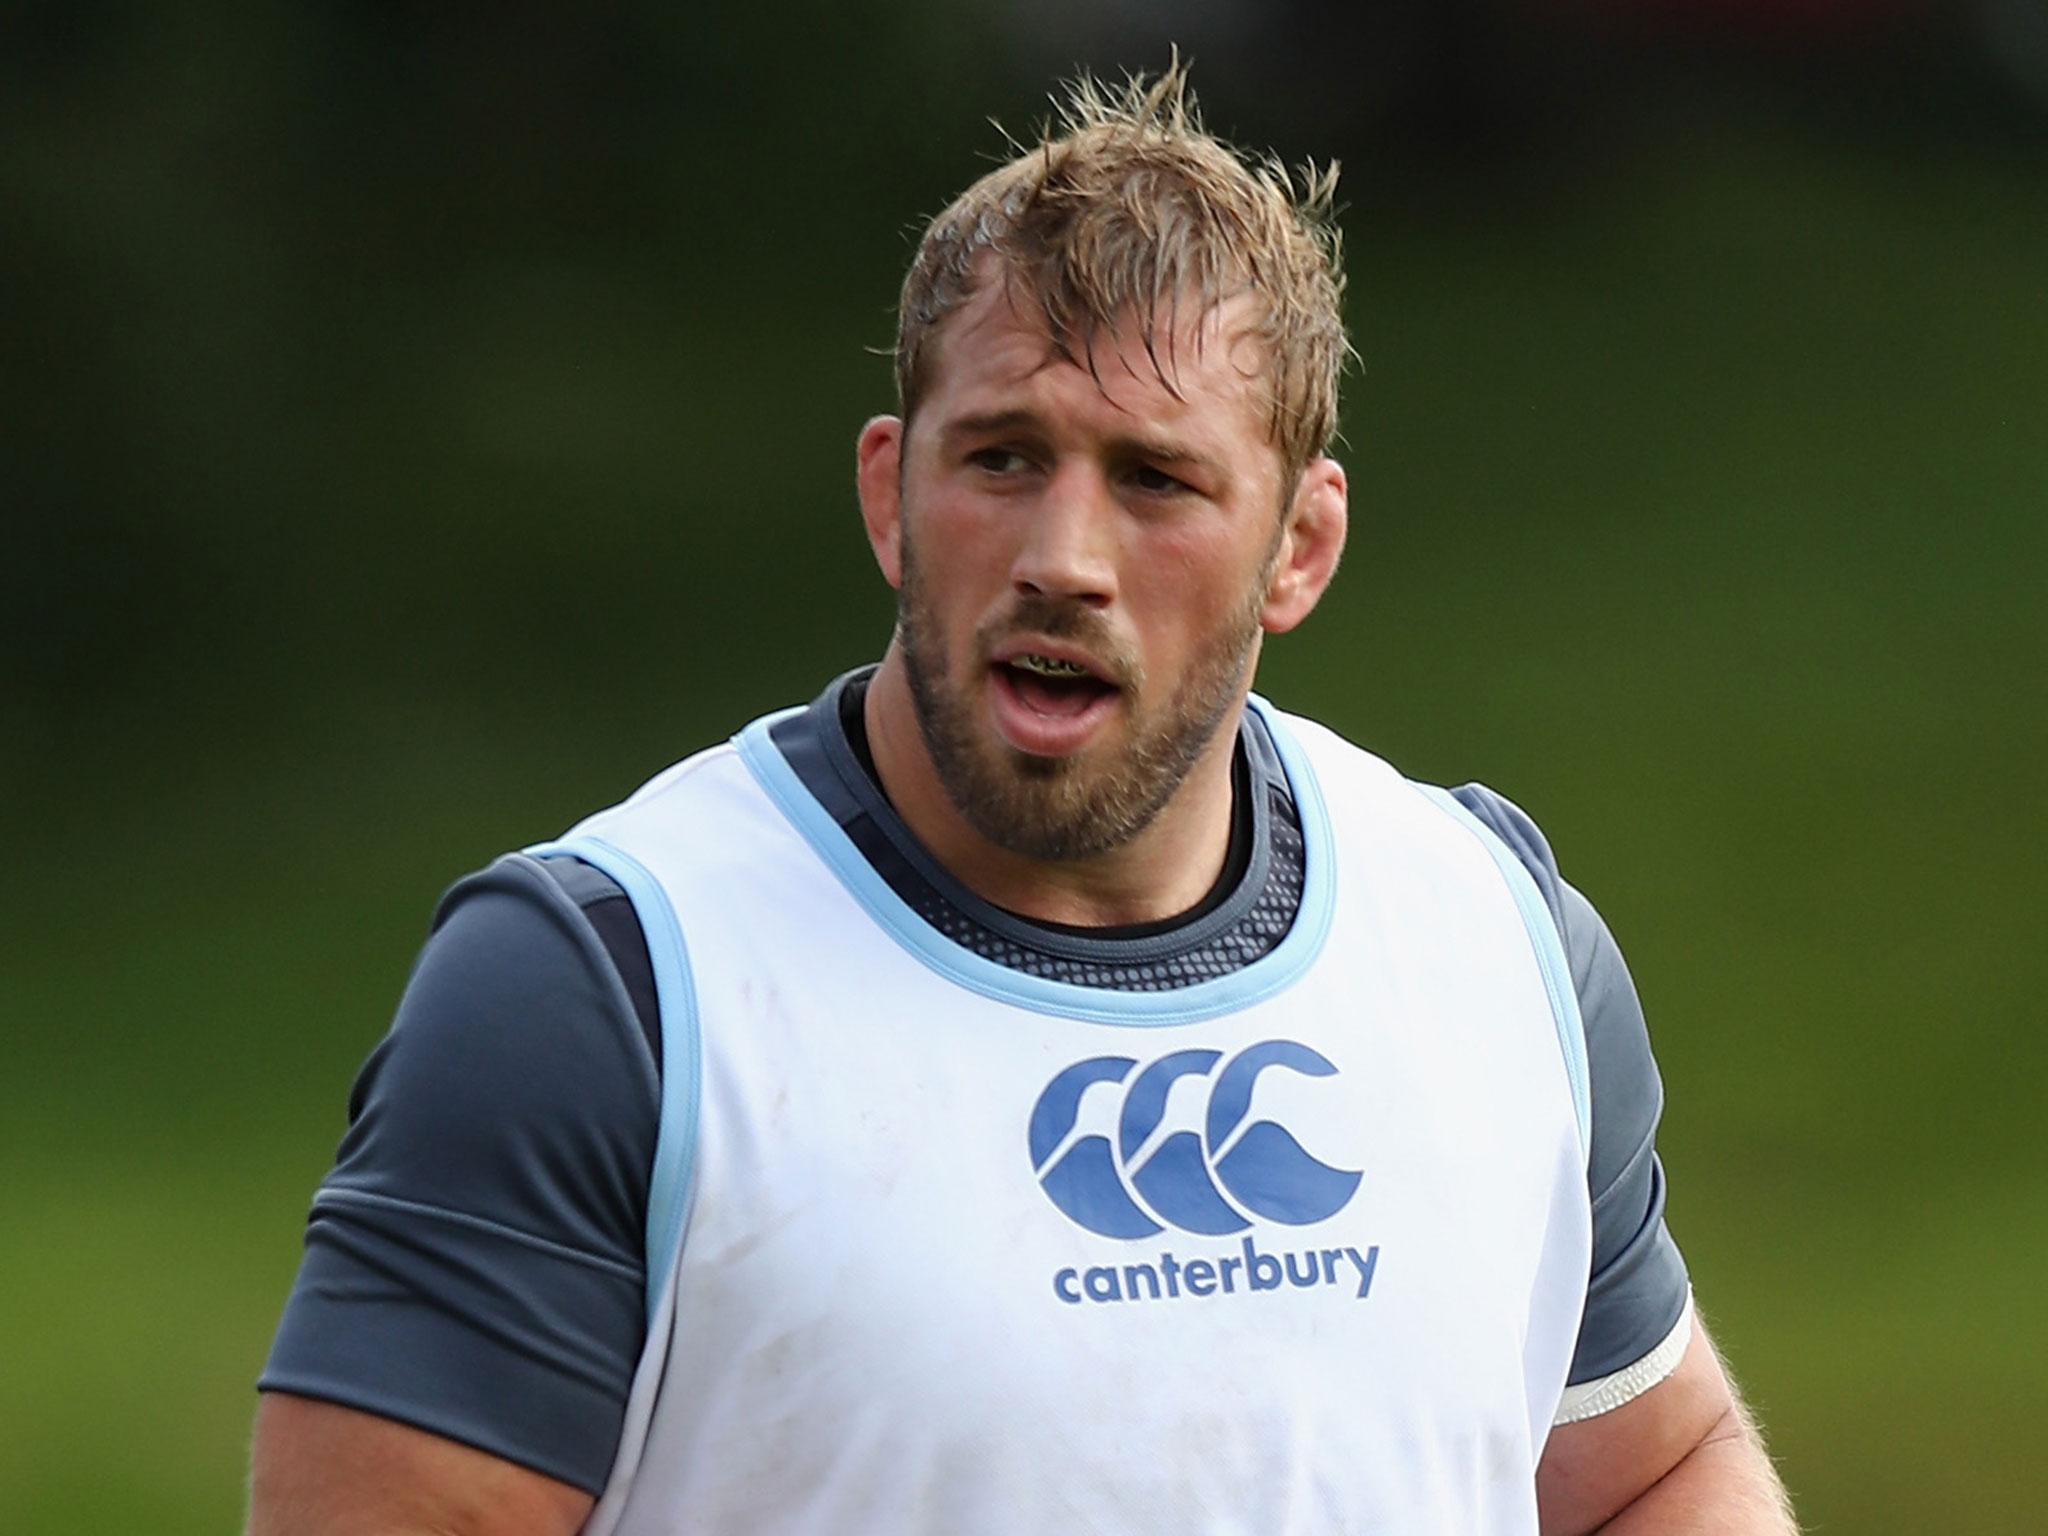 Chris Robshaw was not affected by his omission from the British and Irish Lions squad